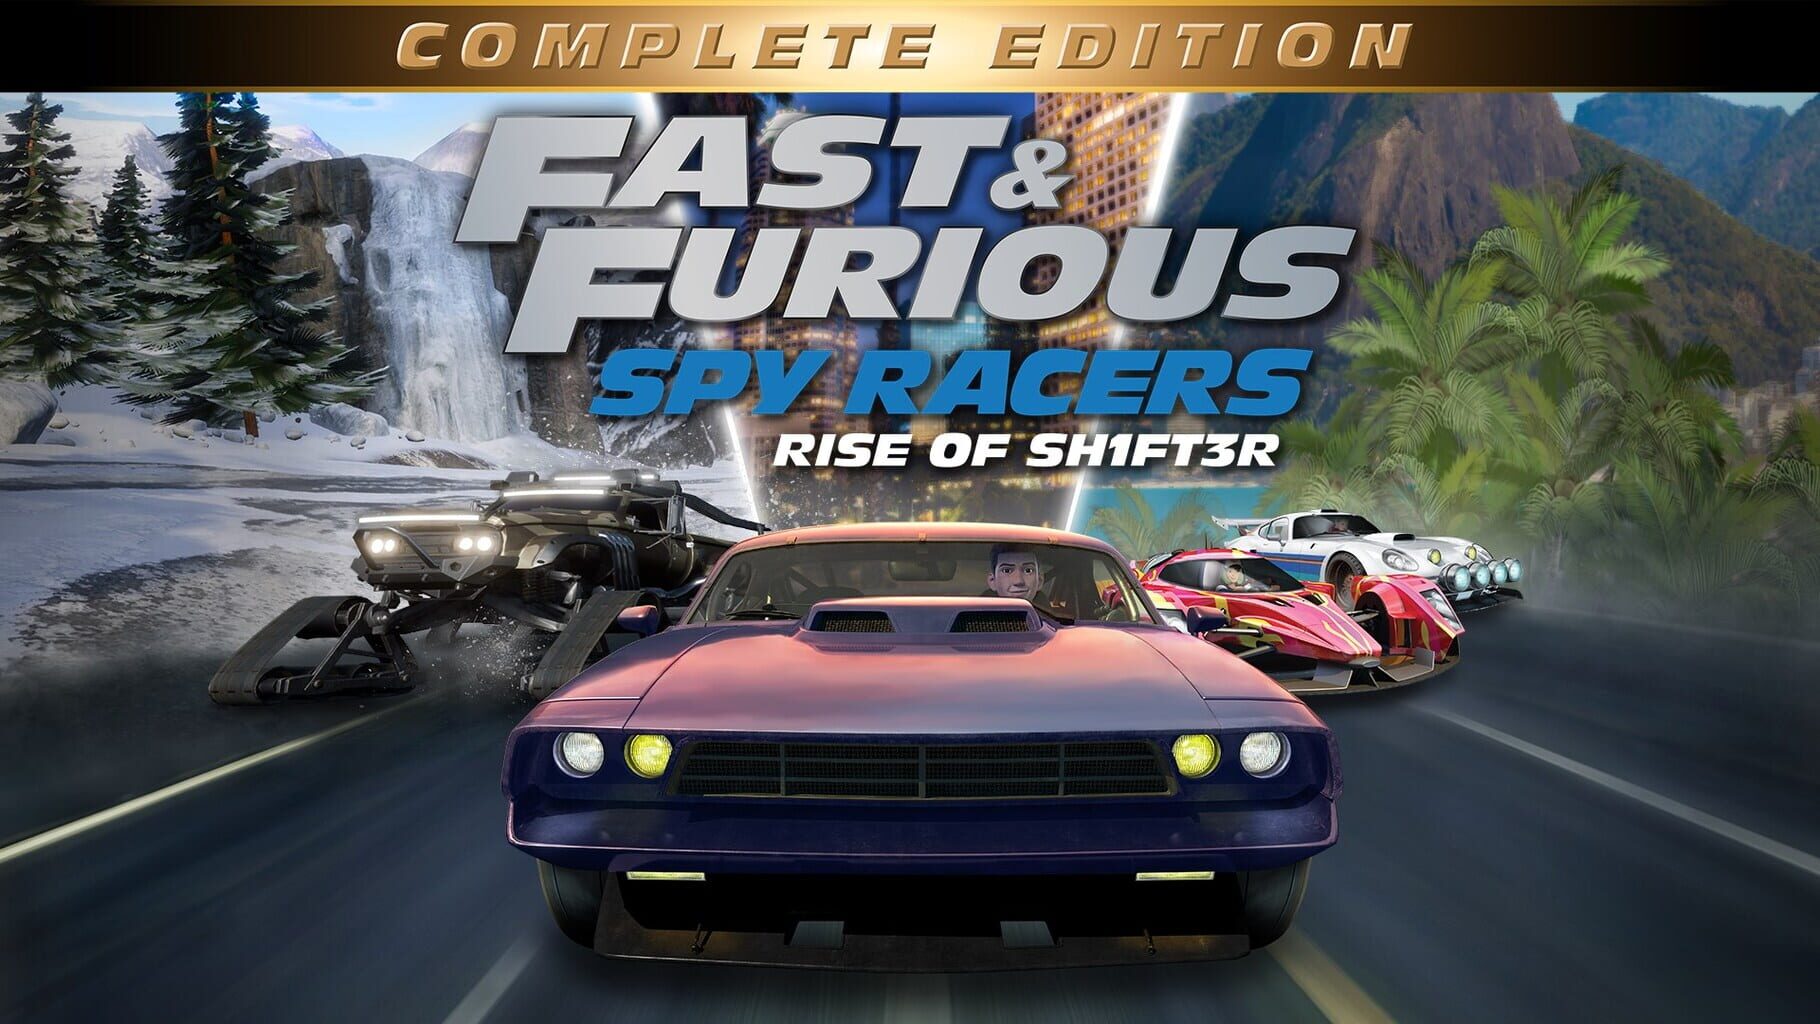 Fast & Furious: Spy Racers Rise of Sh1ft3r - Complete Edition artwork